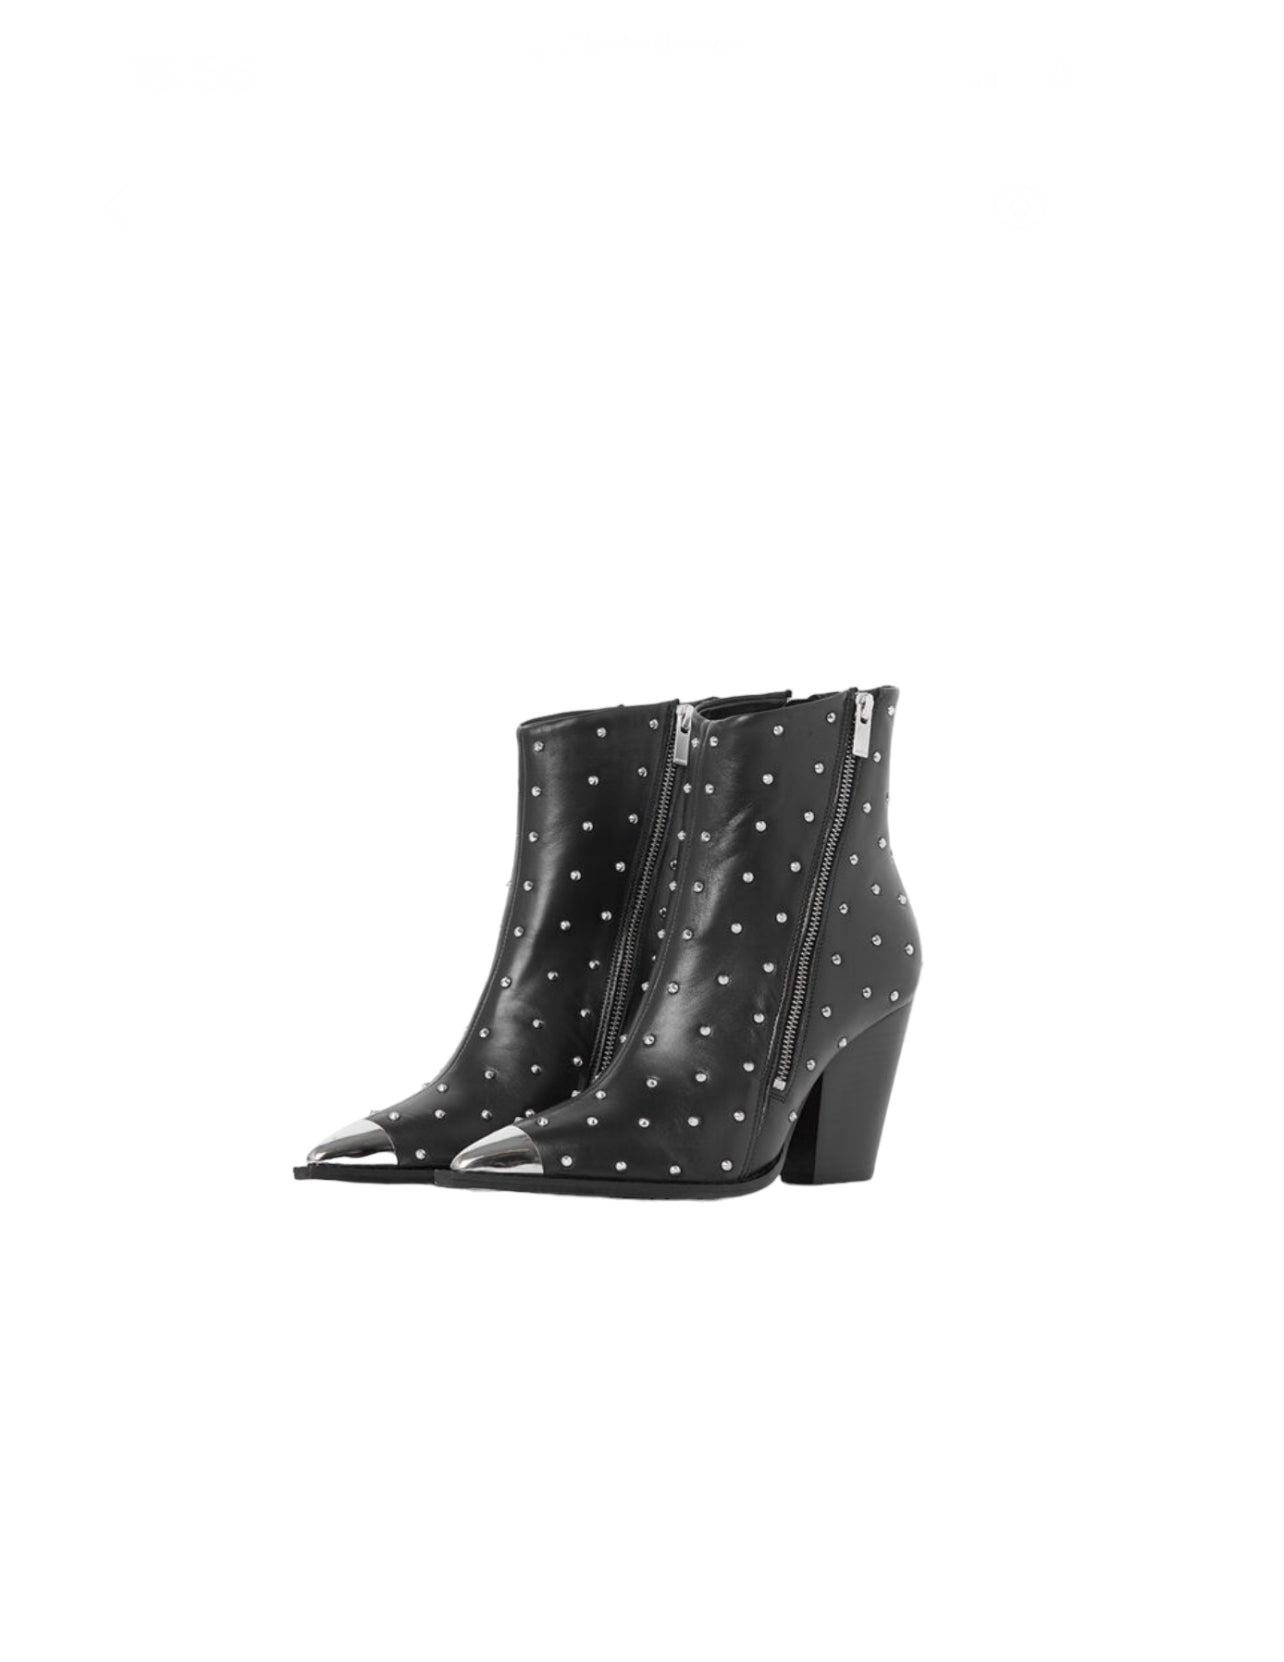 Load image into Gallery viewer, The Kooples Black Studded Boots
